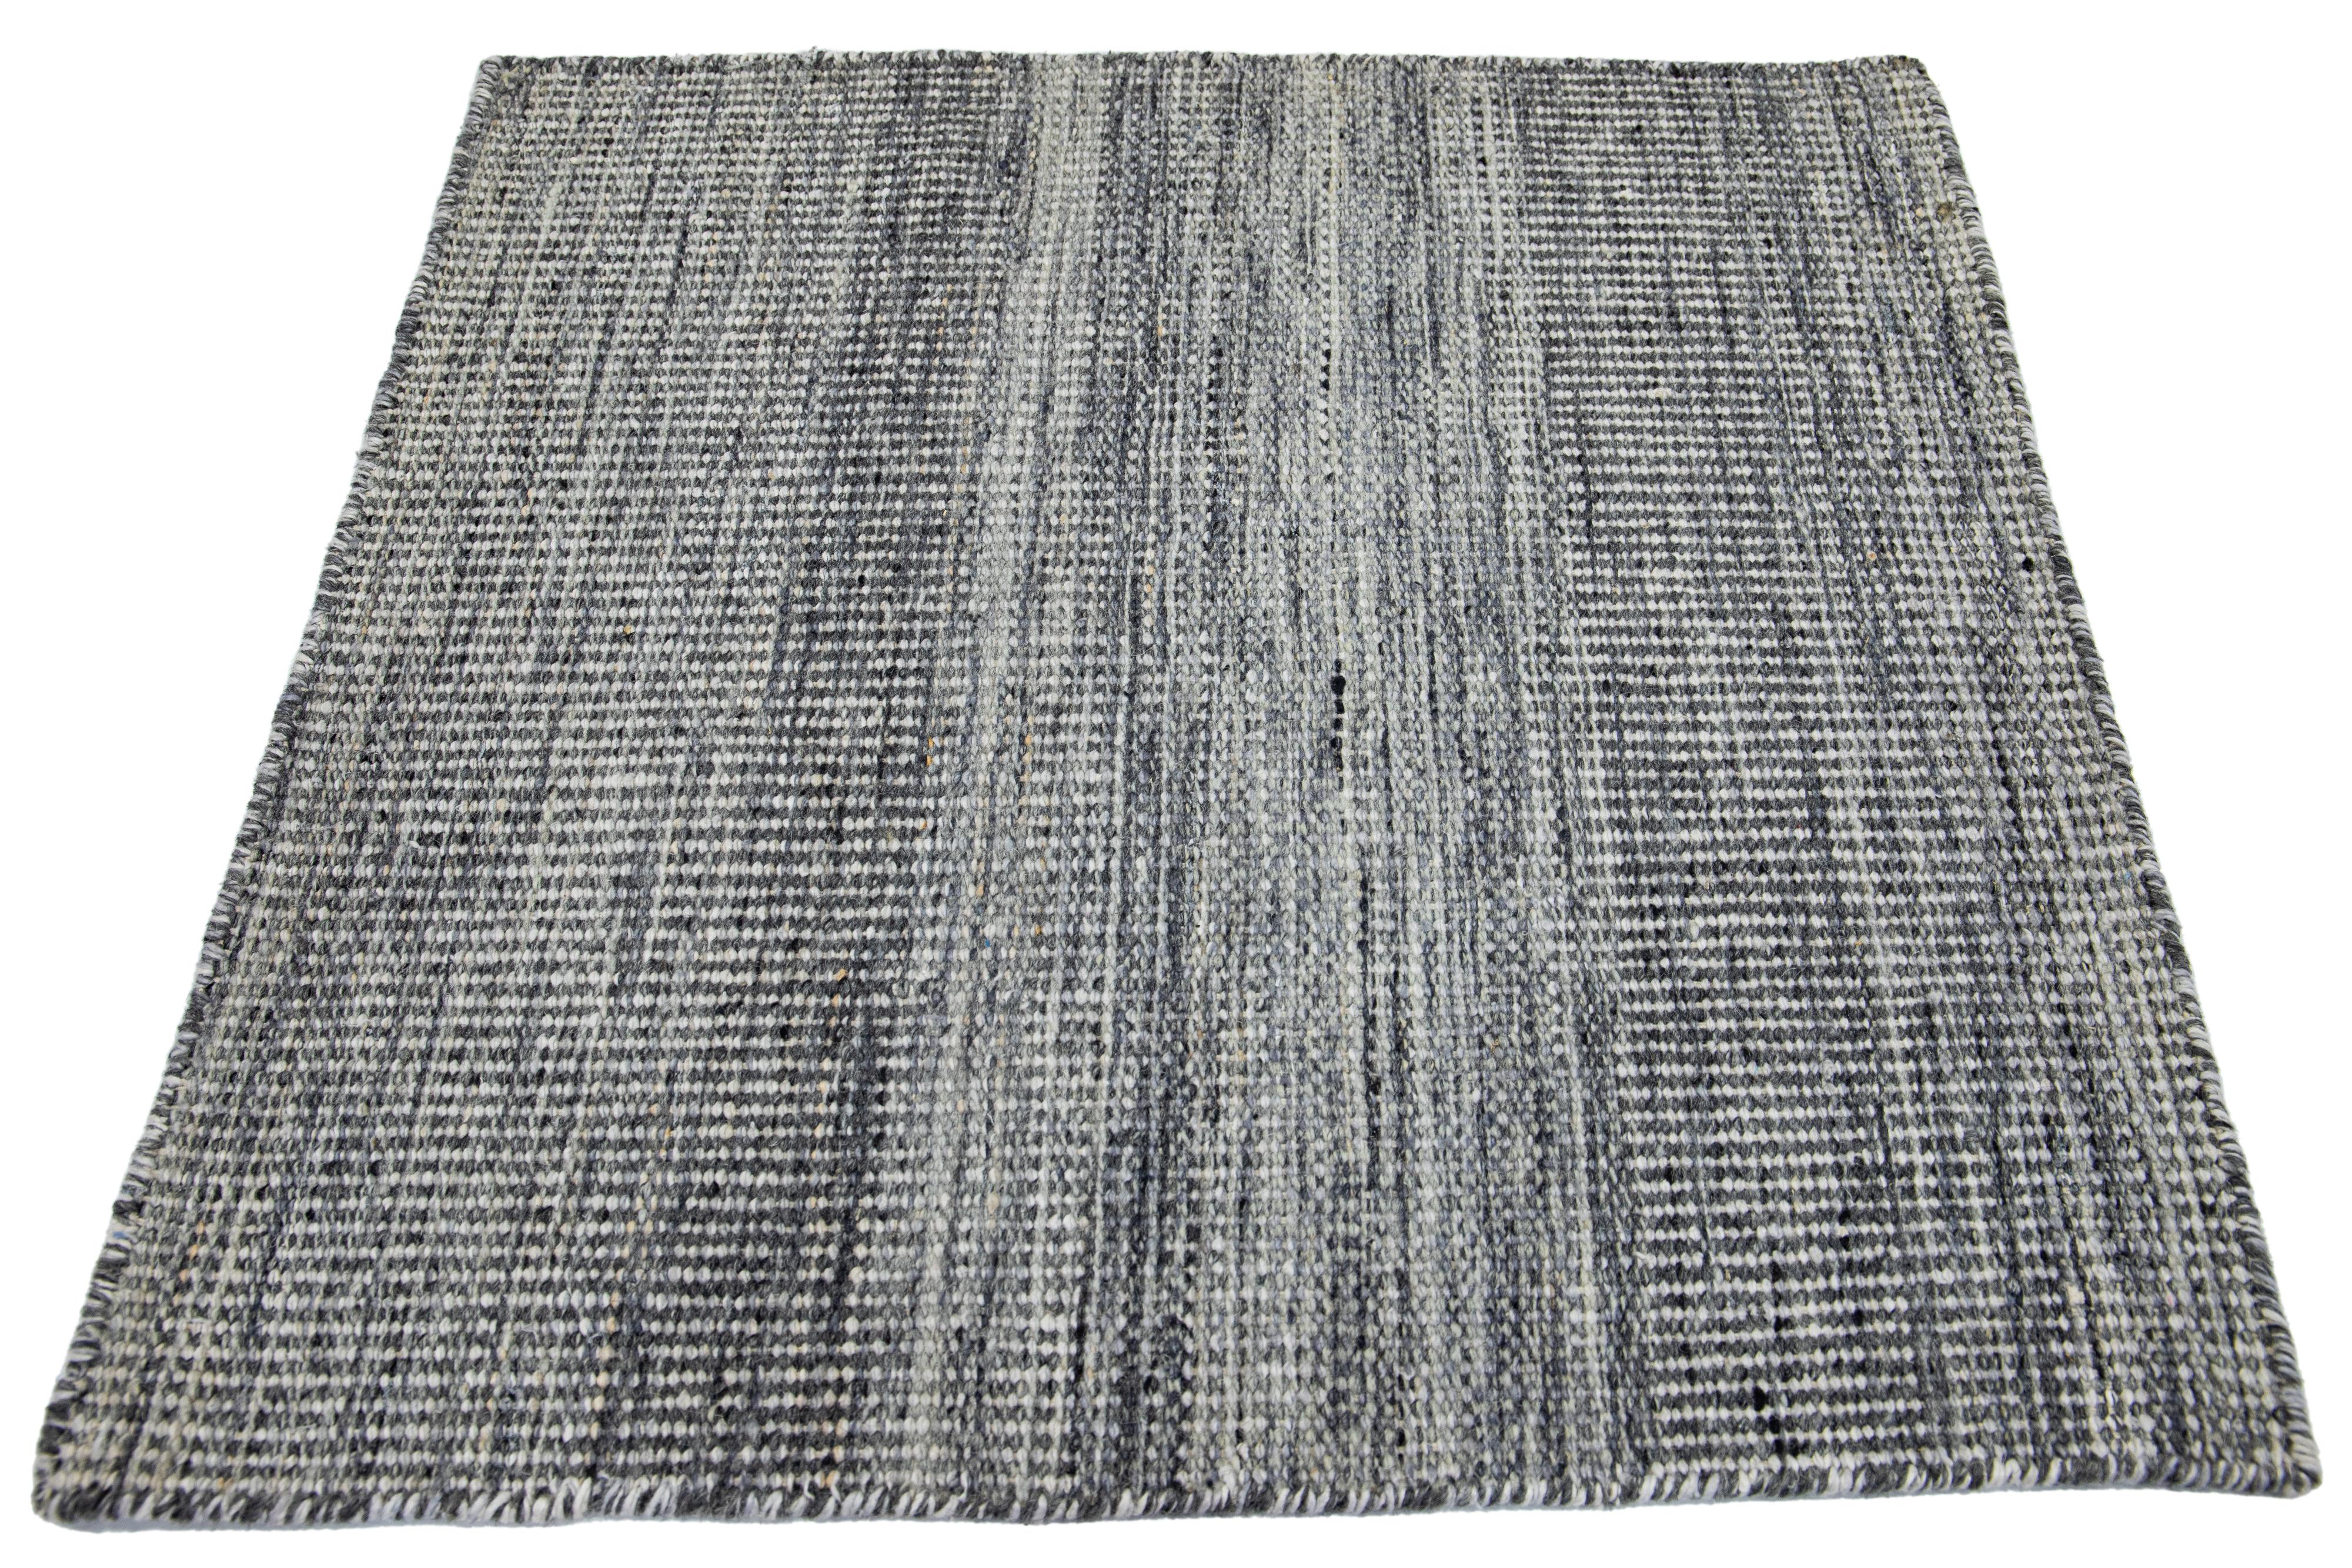 Apadana's Kilim Flatweave wool custom rug. Custom sizes and colors made-to-order.

Material: Wool.
Techniques: Flatweave.
Style: Solid-Coastal.
Lead time: Approx. 15-16 weeks available.
Colors: As shown, other custom colors are